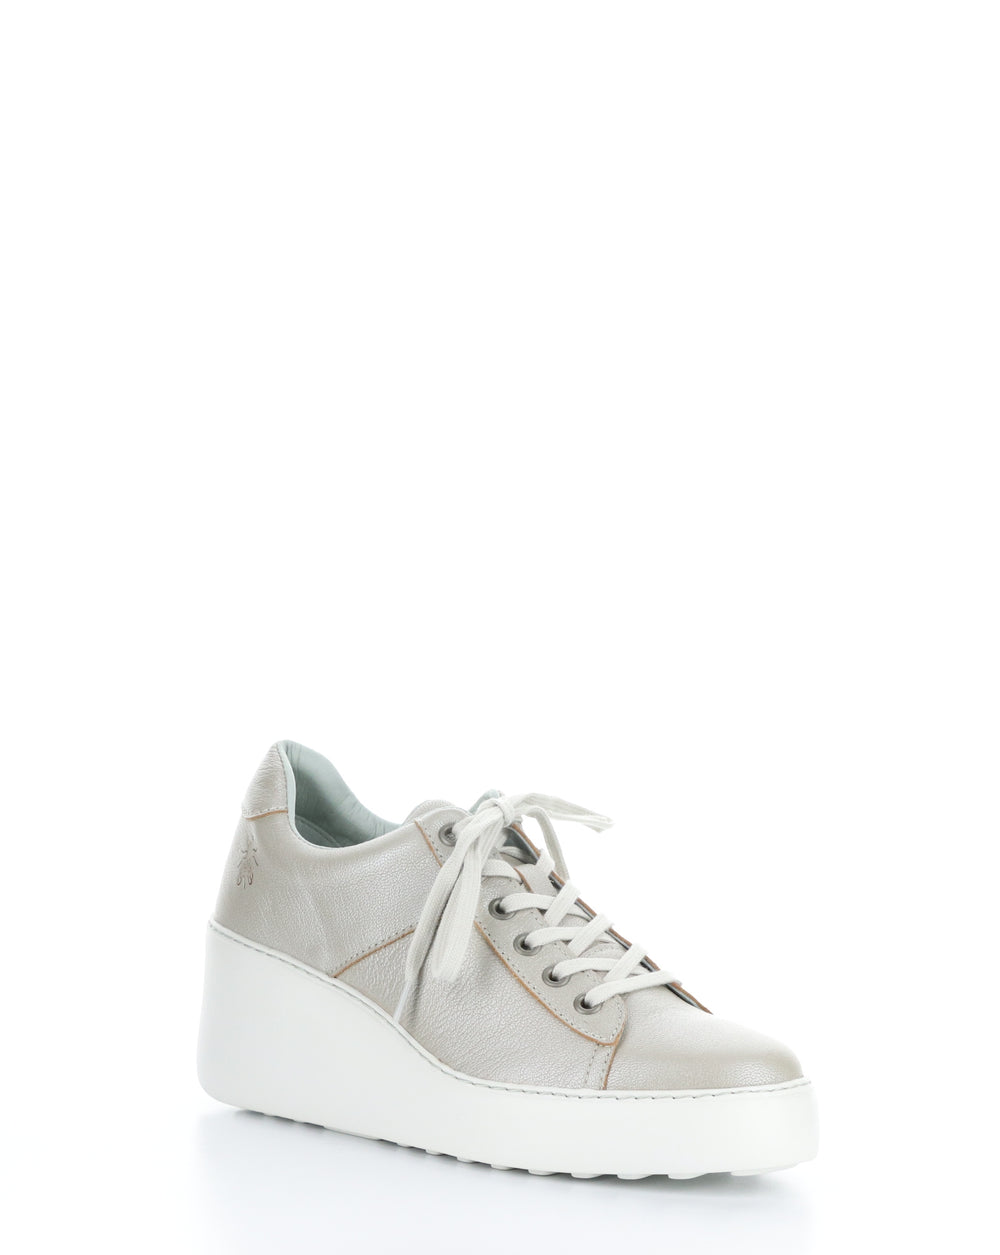 DELF580FLY 004 SILVER Lace-up Shoes